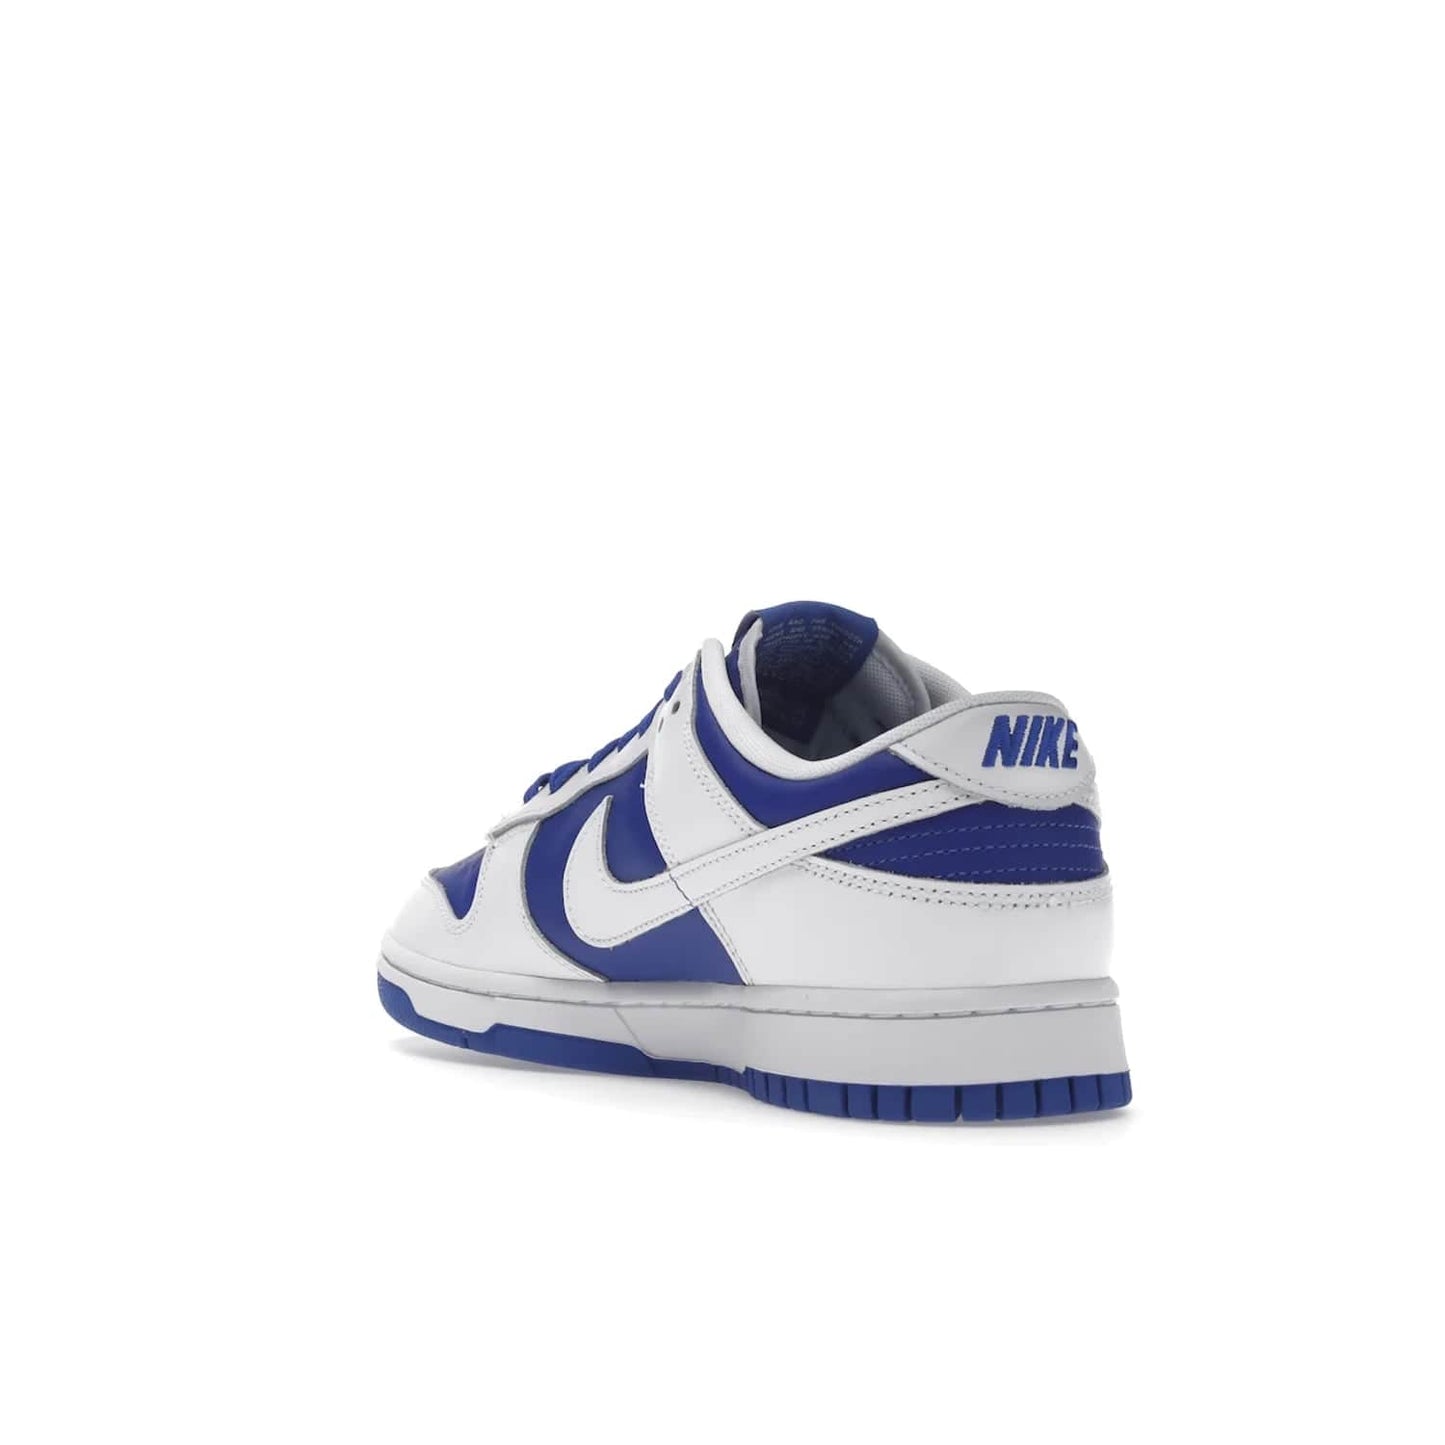 Nike Dunk Low Racer Blue White - Image 25 - Only at www.BallersClubKickz.com - Sleek Racer Blue leather upper and white leather overlays make up the Nike Dunk Low Racer Blue White. Woven tag and heel embroidery for a 1985 Dunk look with a matching EVA foam sole completes the classic colorway.